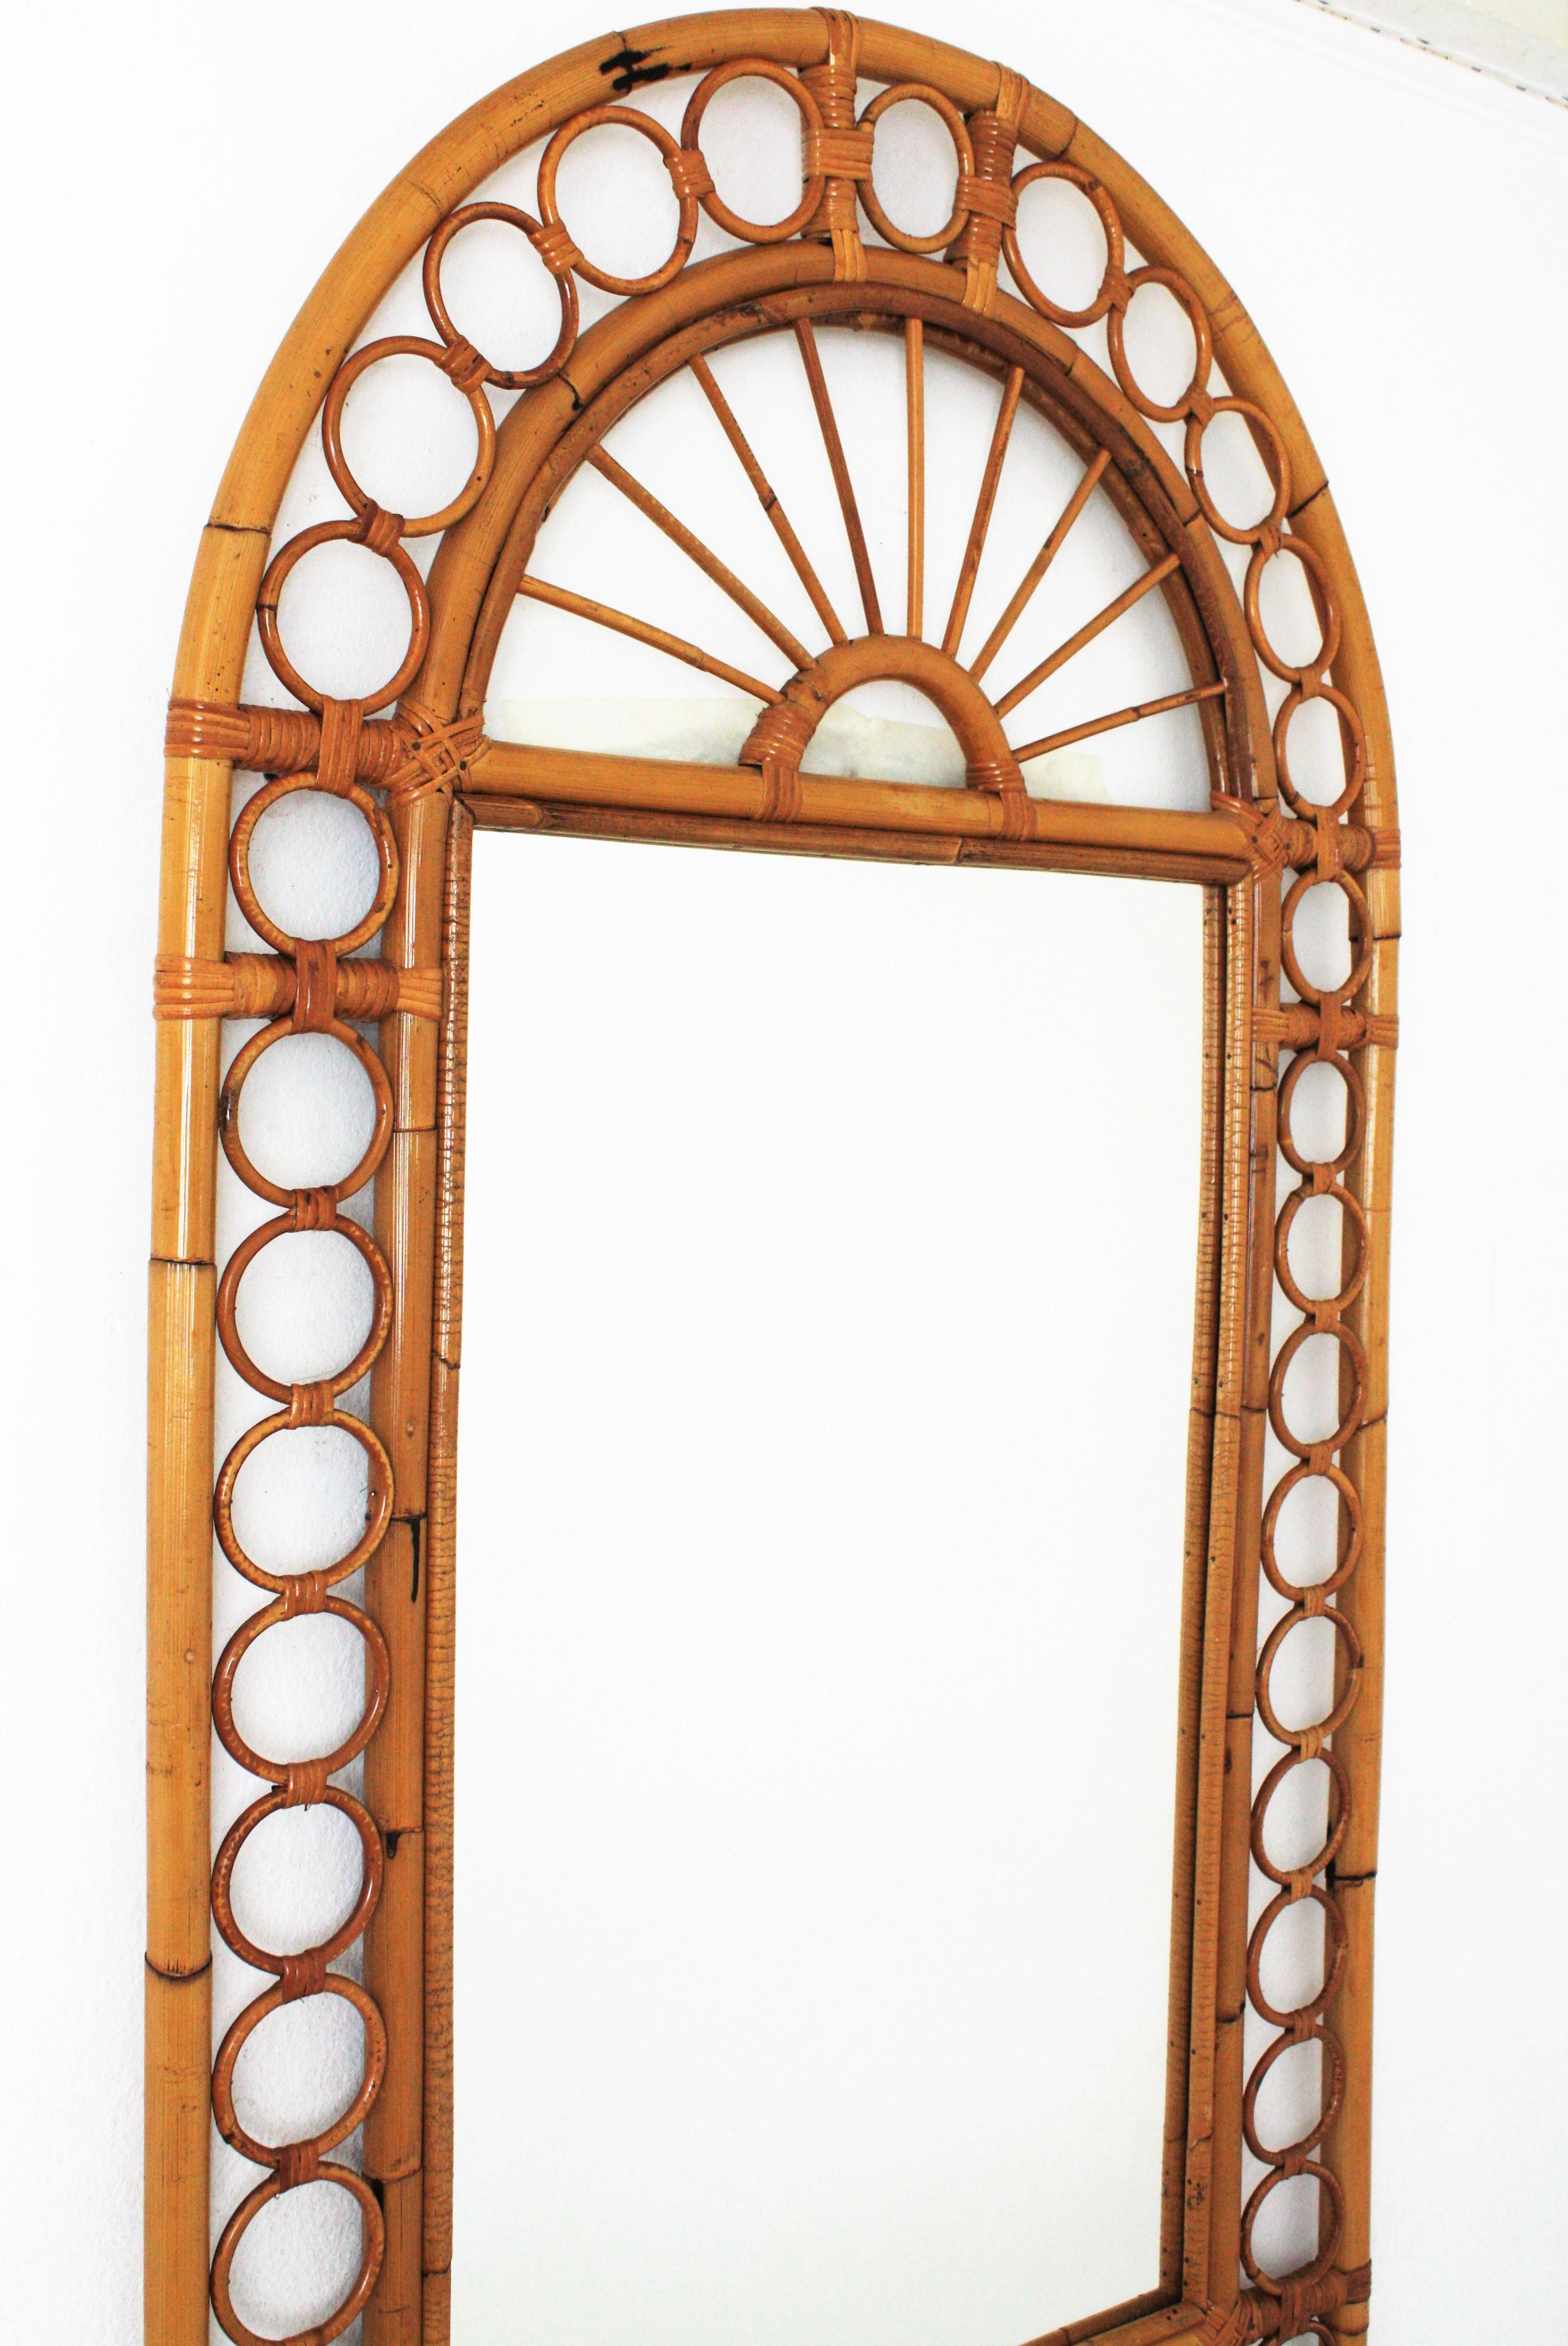 20th Century Rattan Bamboo Wall Mirror with Rings Frame, Franco Albini Style